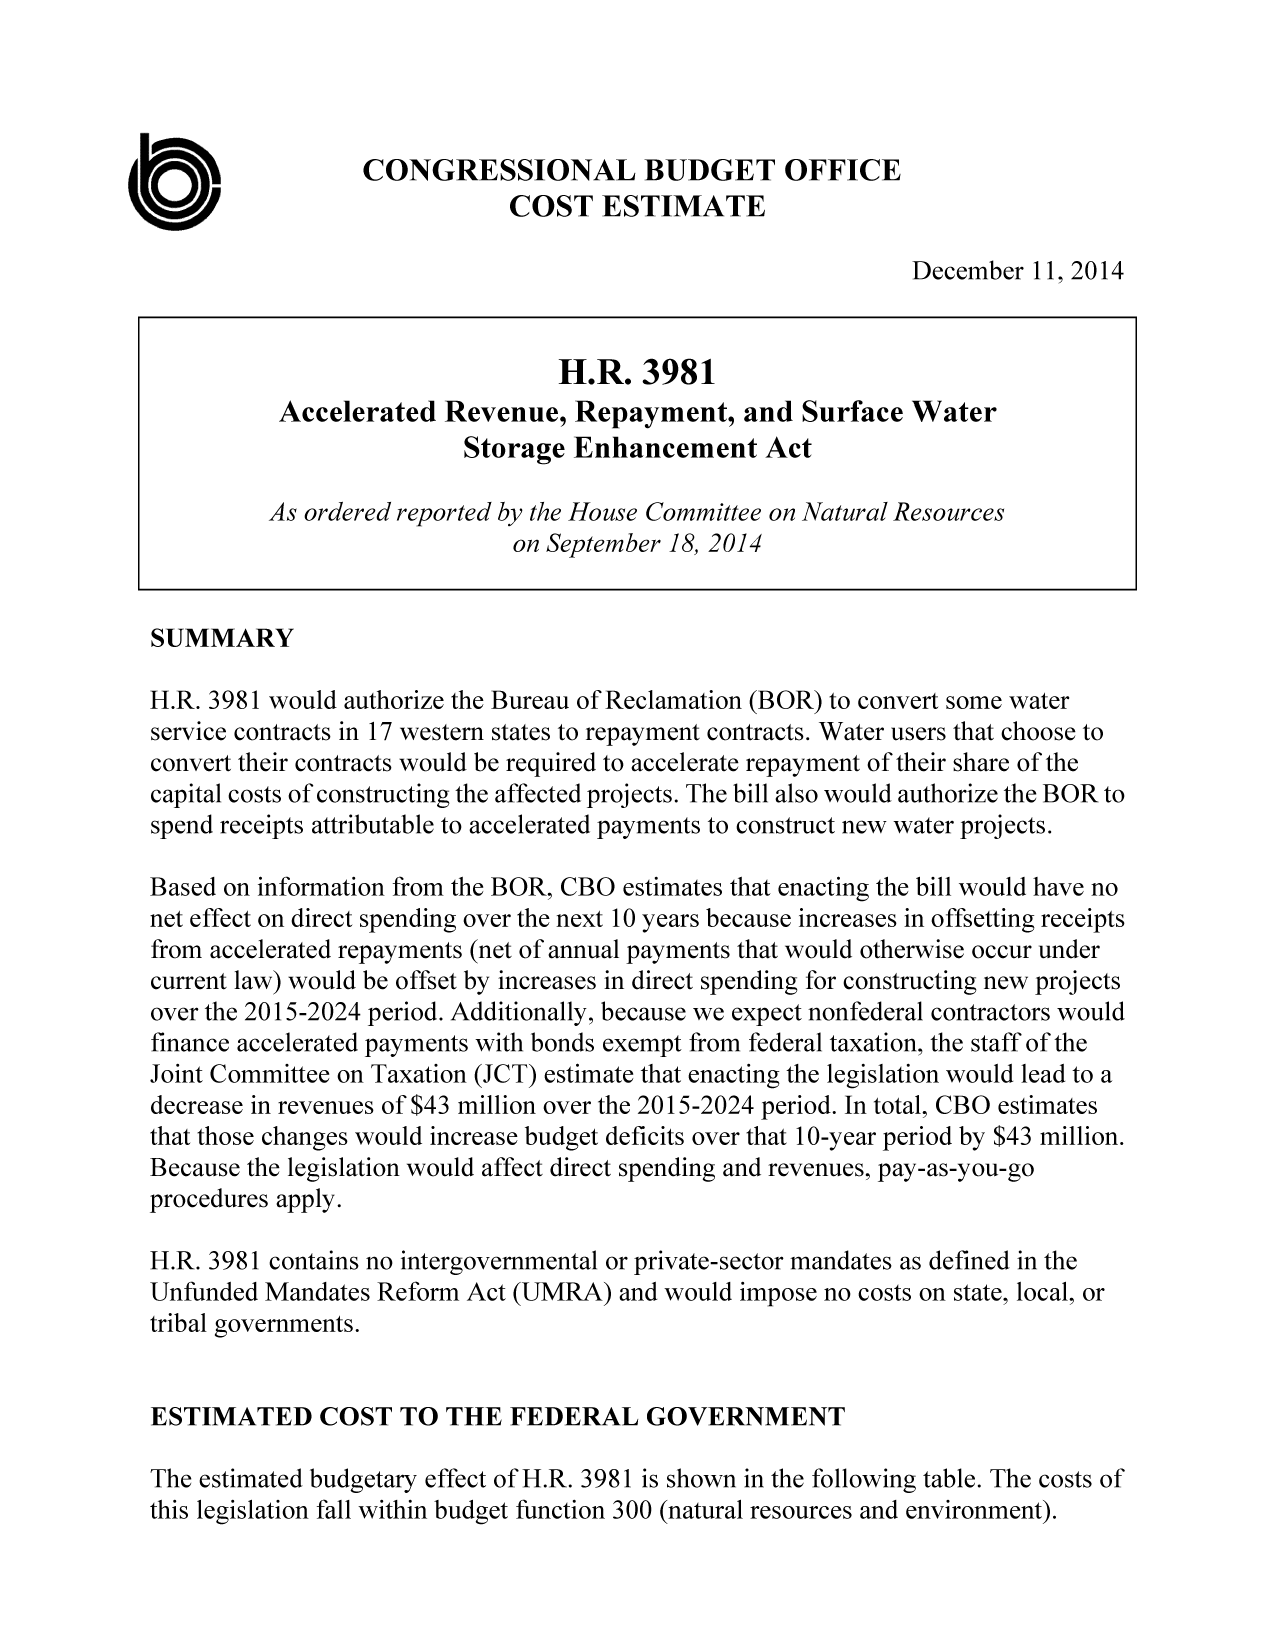 handle is hein.congrec/cbo2024 and id is 1 raw text is: k           CONGRESSIONAL BUDGET OFFICE
Ua                            COST ESTIMATE
December 11,2014
H.R. 3981
Accelerated Revenue, Repayment, and Surface Water
Storage Enhancement Act
As ordered reported by the House Committee on Natural Resources
on September 18, 2014
SUMMARY
H.R. 3981 would authorize the Bureau of Reclamation (BOR) to convert some water
service contracts in 17 western states to repayment contracts. Water users that choose to
convert their contracts would be required to accelerate repayment of their share of the
capital costs of constructing the affected projects. The bill also would authorize the BOR to
spend receipts attributable to accelerated payments to construct new water projects.
Based on information from the BOR, CBO estimates that enacting the bill would have no
net effect on direct spending over the next 10 years because increases in offsetting receipts
from accelerated repayments (net of annual payments that would otherwise occur under
current law) would be offset by increases in direct spending for constructing new projects
over the 2015-2024 period. Additionally, because we expect nonfederal contractors would
finance accelerated payments with bonds exempt from federal taxation, the staff of the
Joint Committee on Taxation (JCT) estimate that enacting the legislation would lead to a
decrease in revenues of $43 million over the 2015-2024 period. In total, CBO estimates
that those changes would increase budget deficits over that 10-year period by $43 million.
Because the legislation would affect direct spending and revenues, pay-as-you-go
procedures apply.
H.R. 3981 contains no intergovernmental or private-sector mandates as defined in the
Unfunded Mandates Reform Act (UMRA) and would impose no costs on state, local, or
tribal governments.
ESTIMATED COST TO THE FEDERAL GOVERNMENT
The estimated budgetary effect of H.R. 3981 is shown in the following table. The costs of
this legislation fall within budget function 300 (natural resources and environment).


